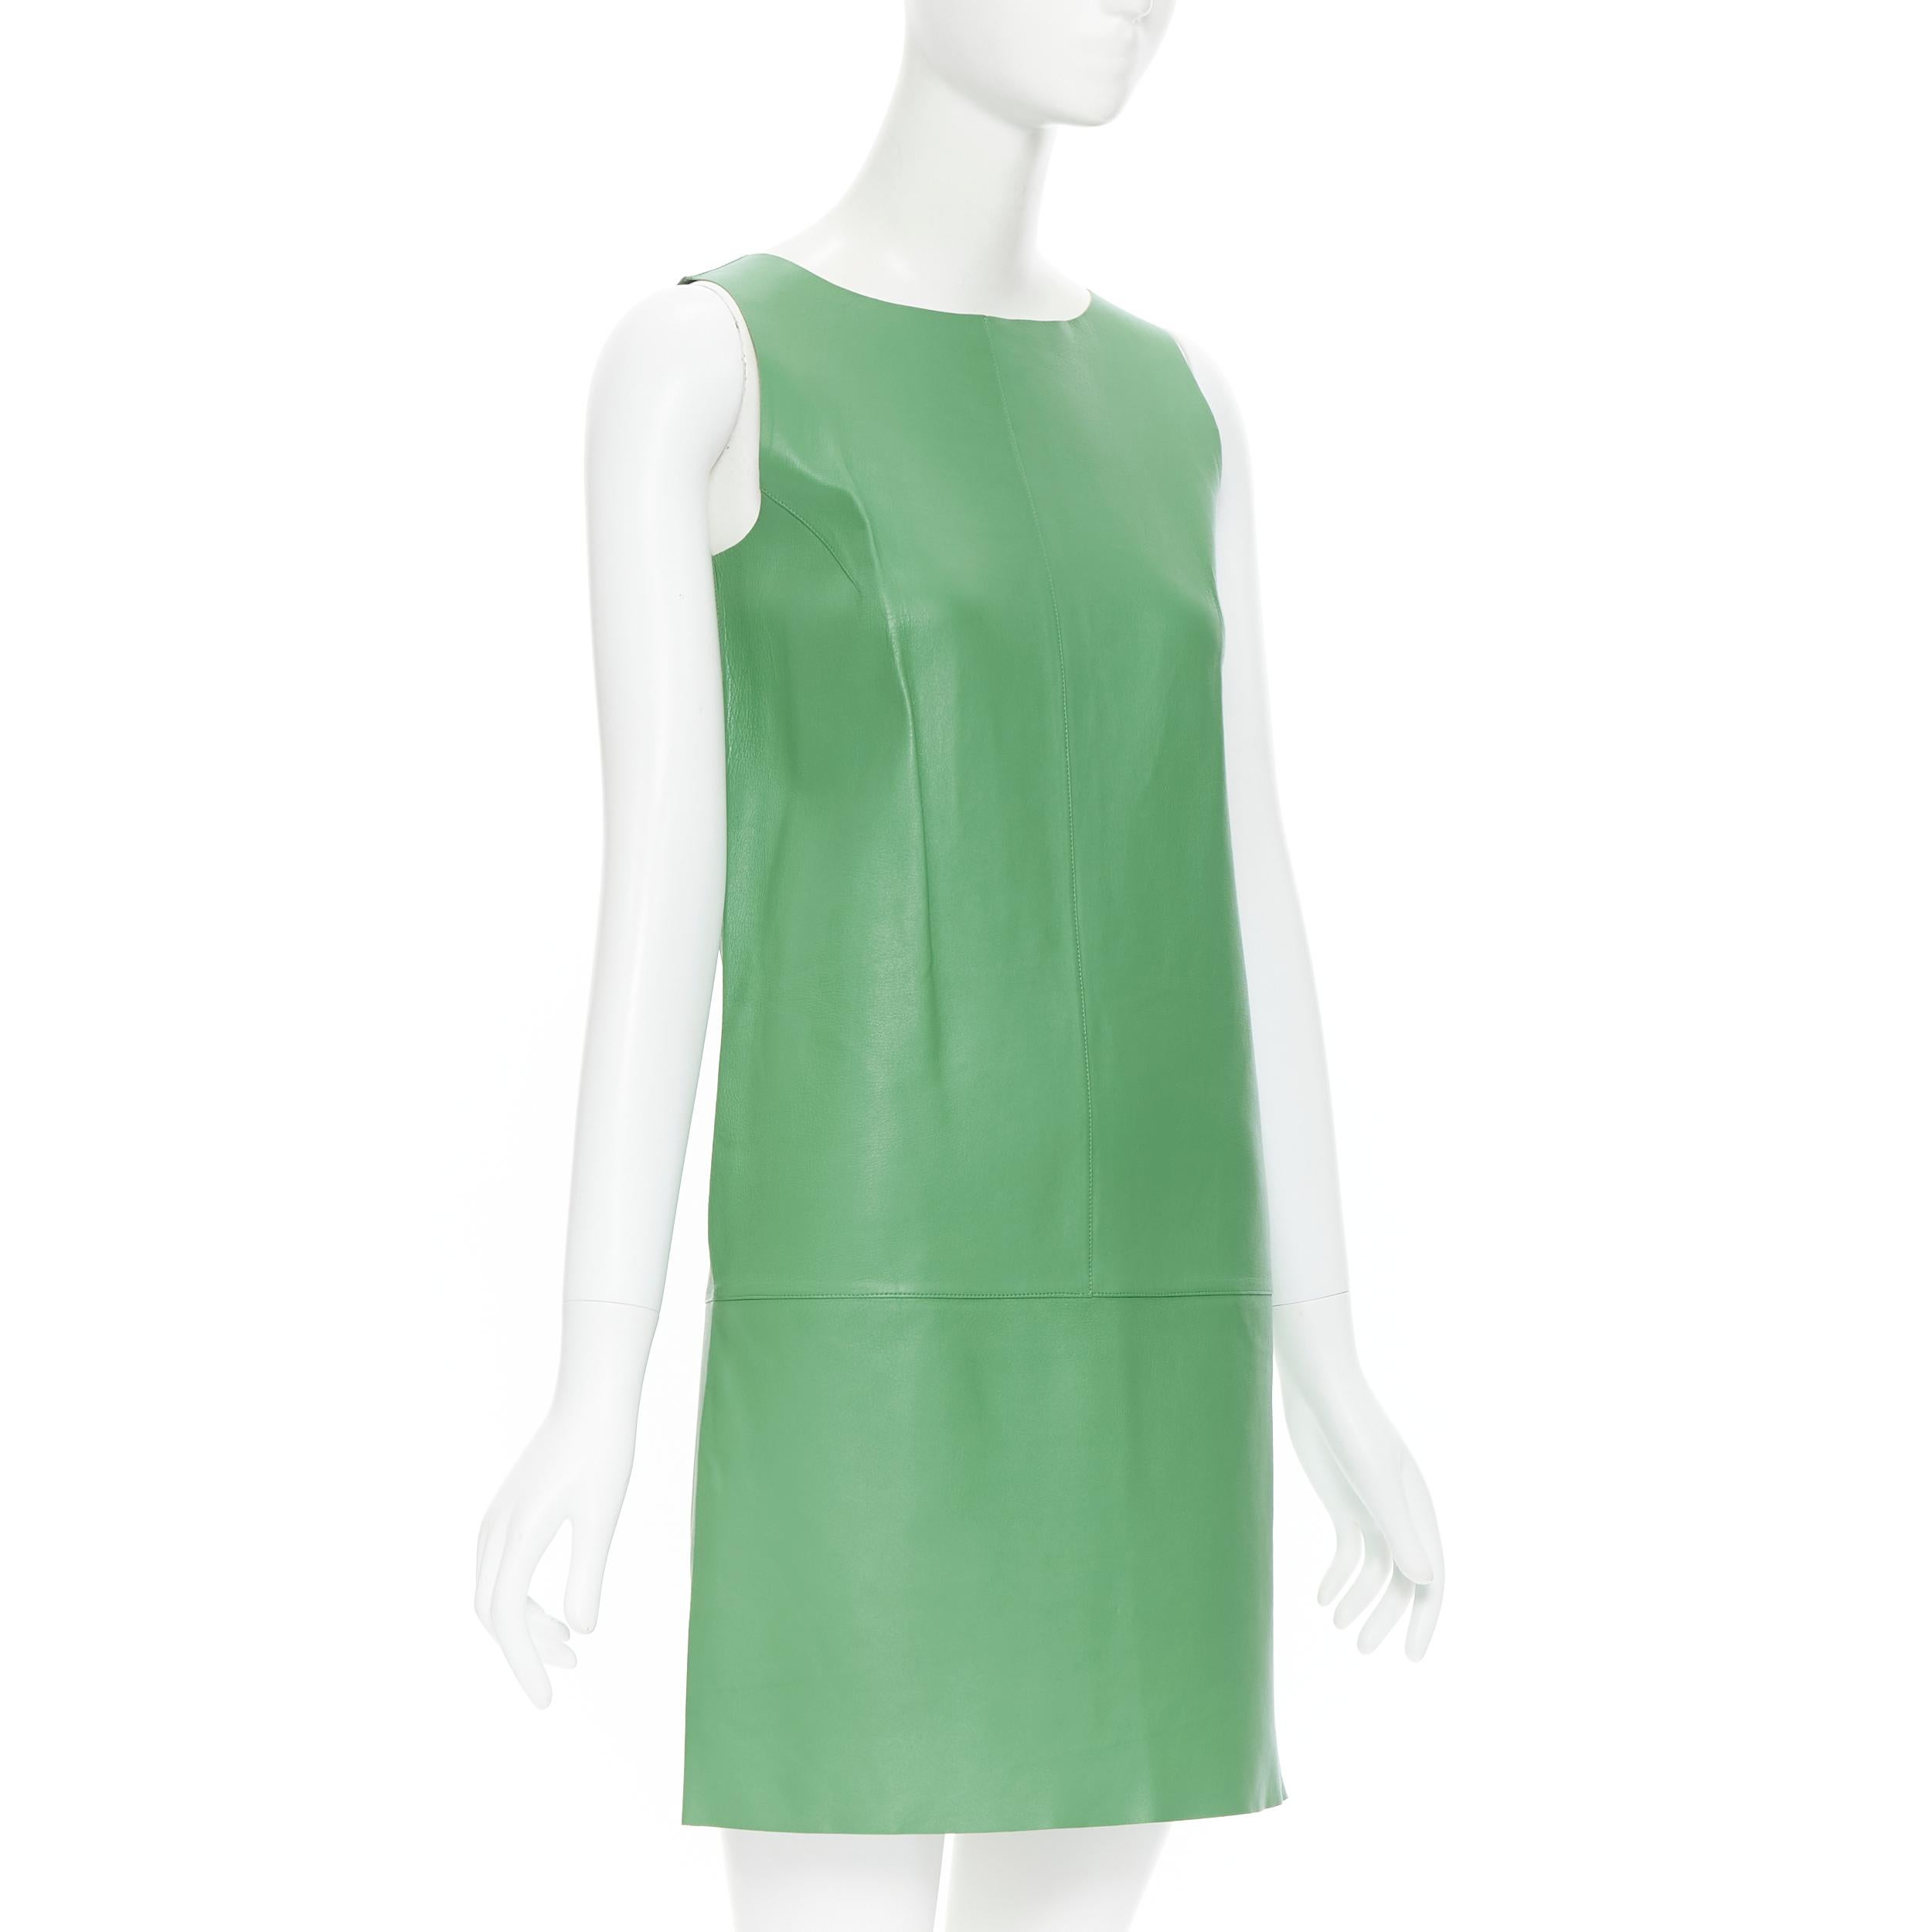 RALPH LAUREN Purple Collection kelly green leather mini dress US2 XS 
Reference: LNKO/A01806 
Brand: Ralph Lauren 
Material: Leather 
Color: Green 
Pattern: Solid 
Closure: Zip 
Extra Detail: Boa neck. Bust dart. Zip back closure. 
Made in: Italy